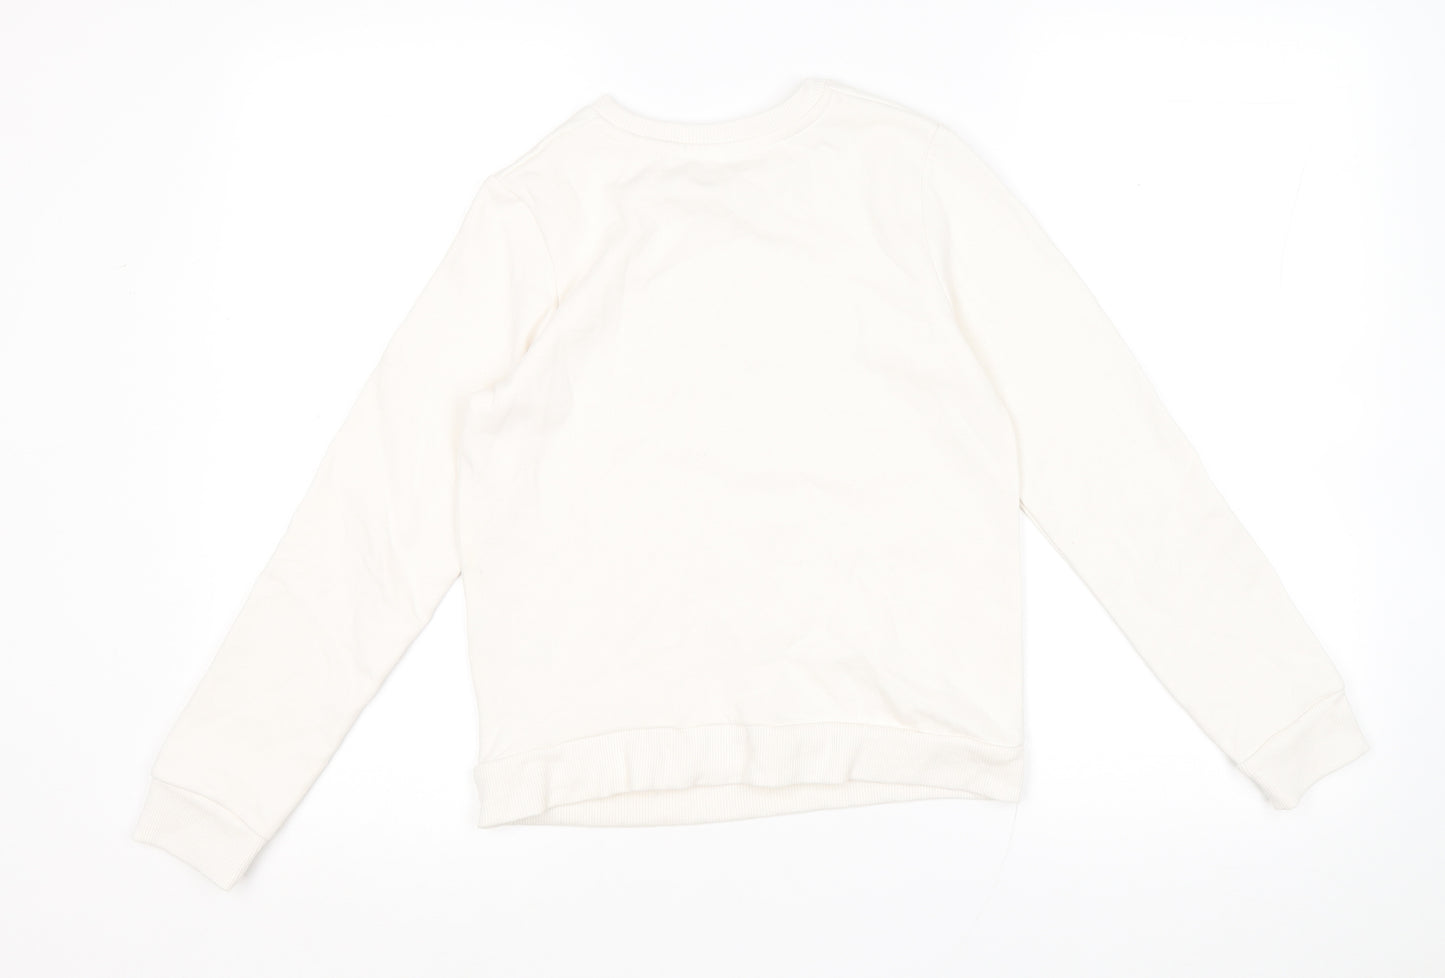 George Girls White Polyester Pullover Sweatshirt Size 10-11 Years Pullover - Pudsey